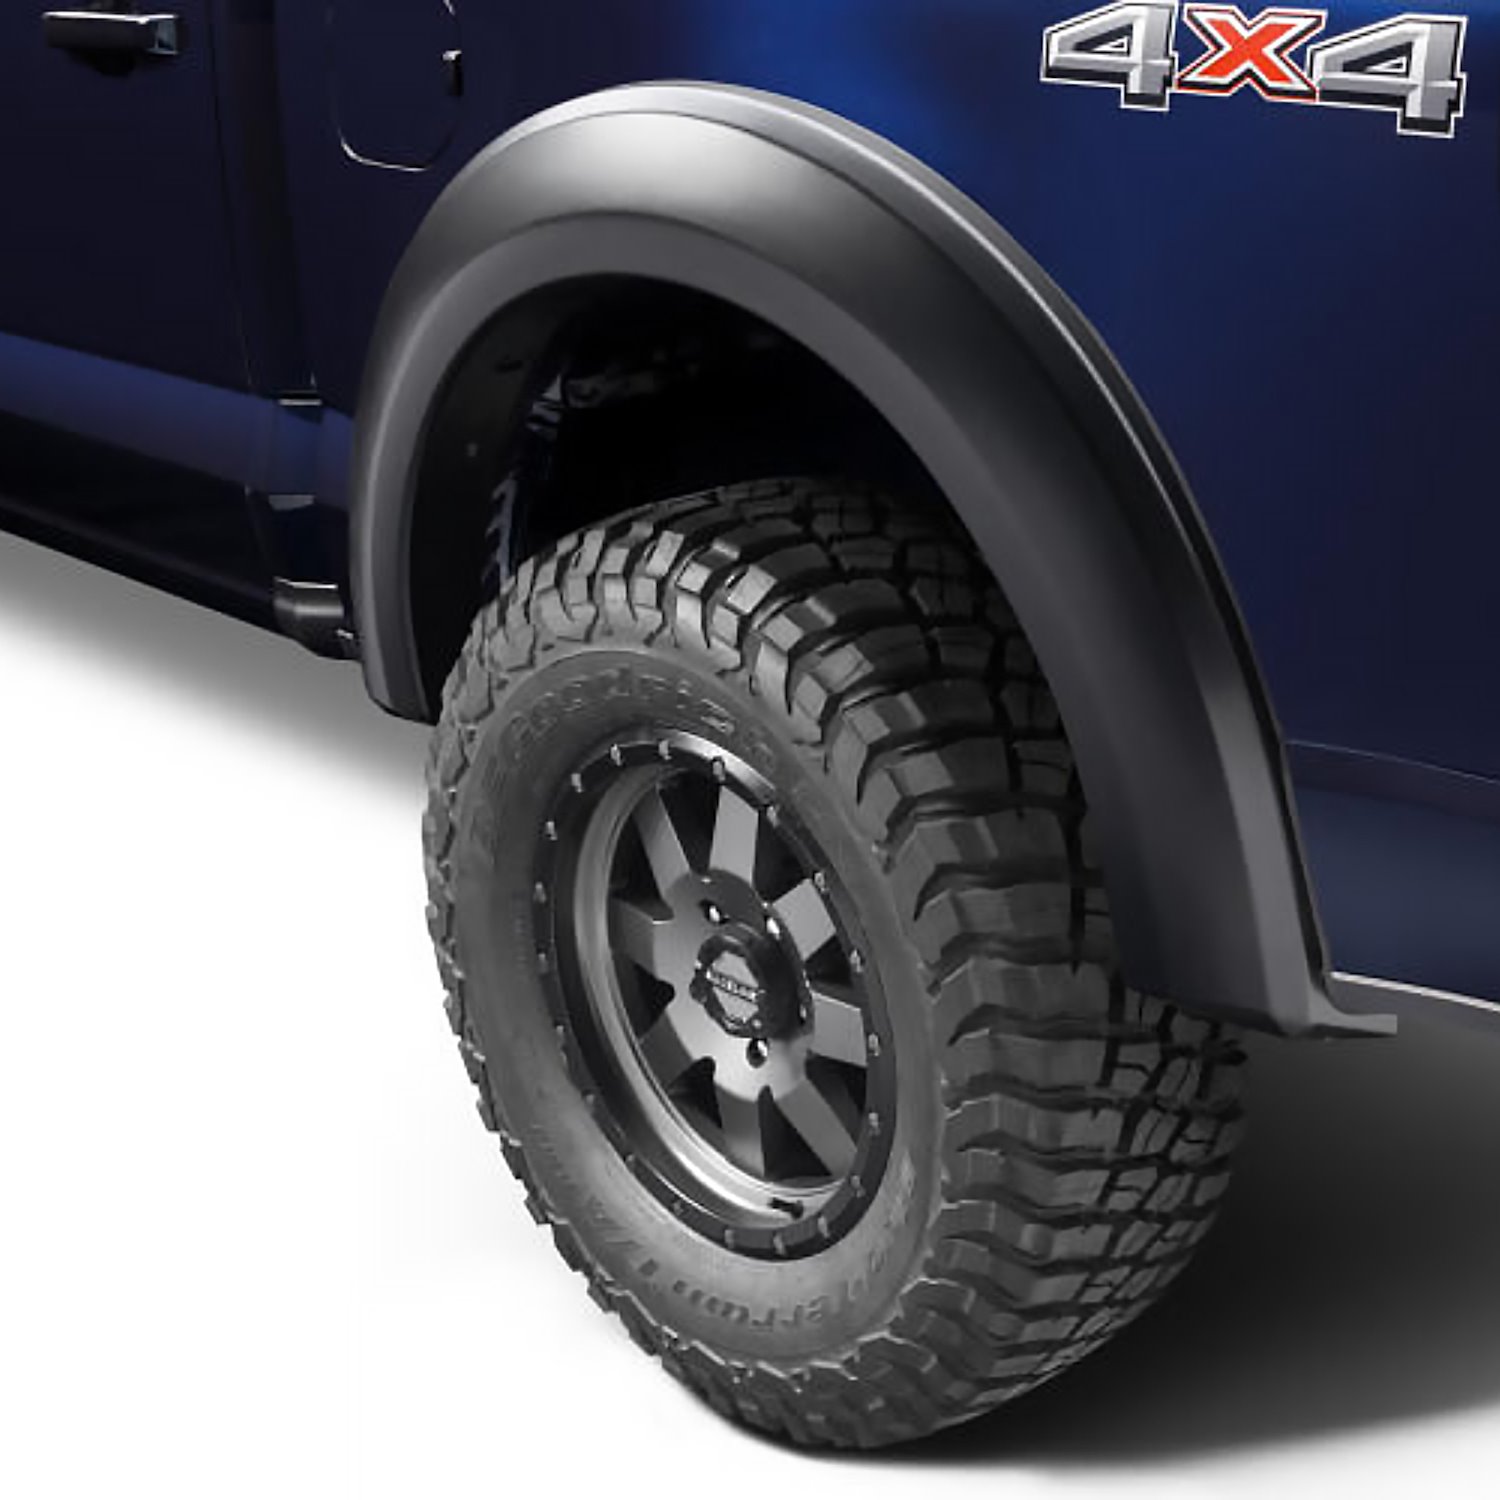 Extend-A-Fender Rear Flares for Select Ford F-150 Trucks - Matte Black Smooth Finish